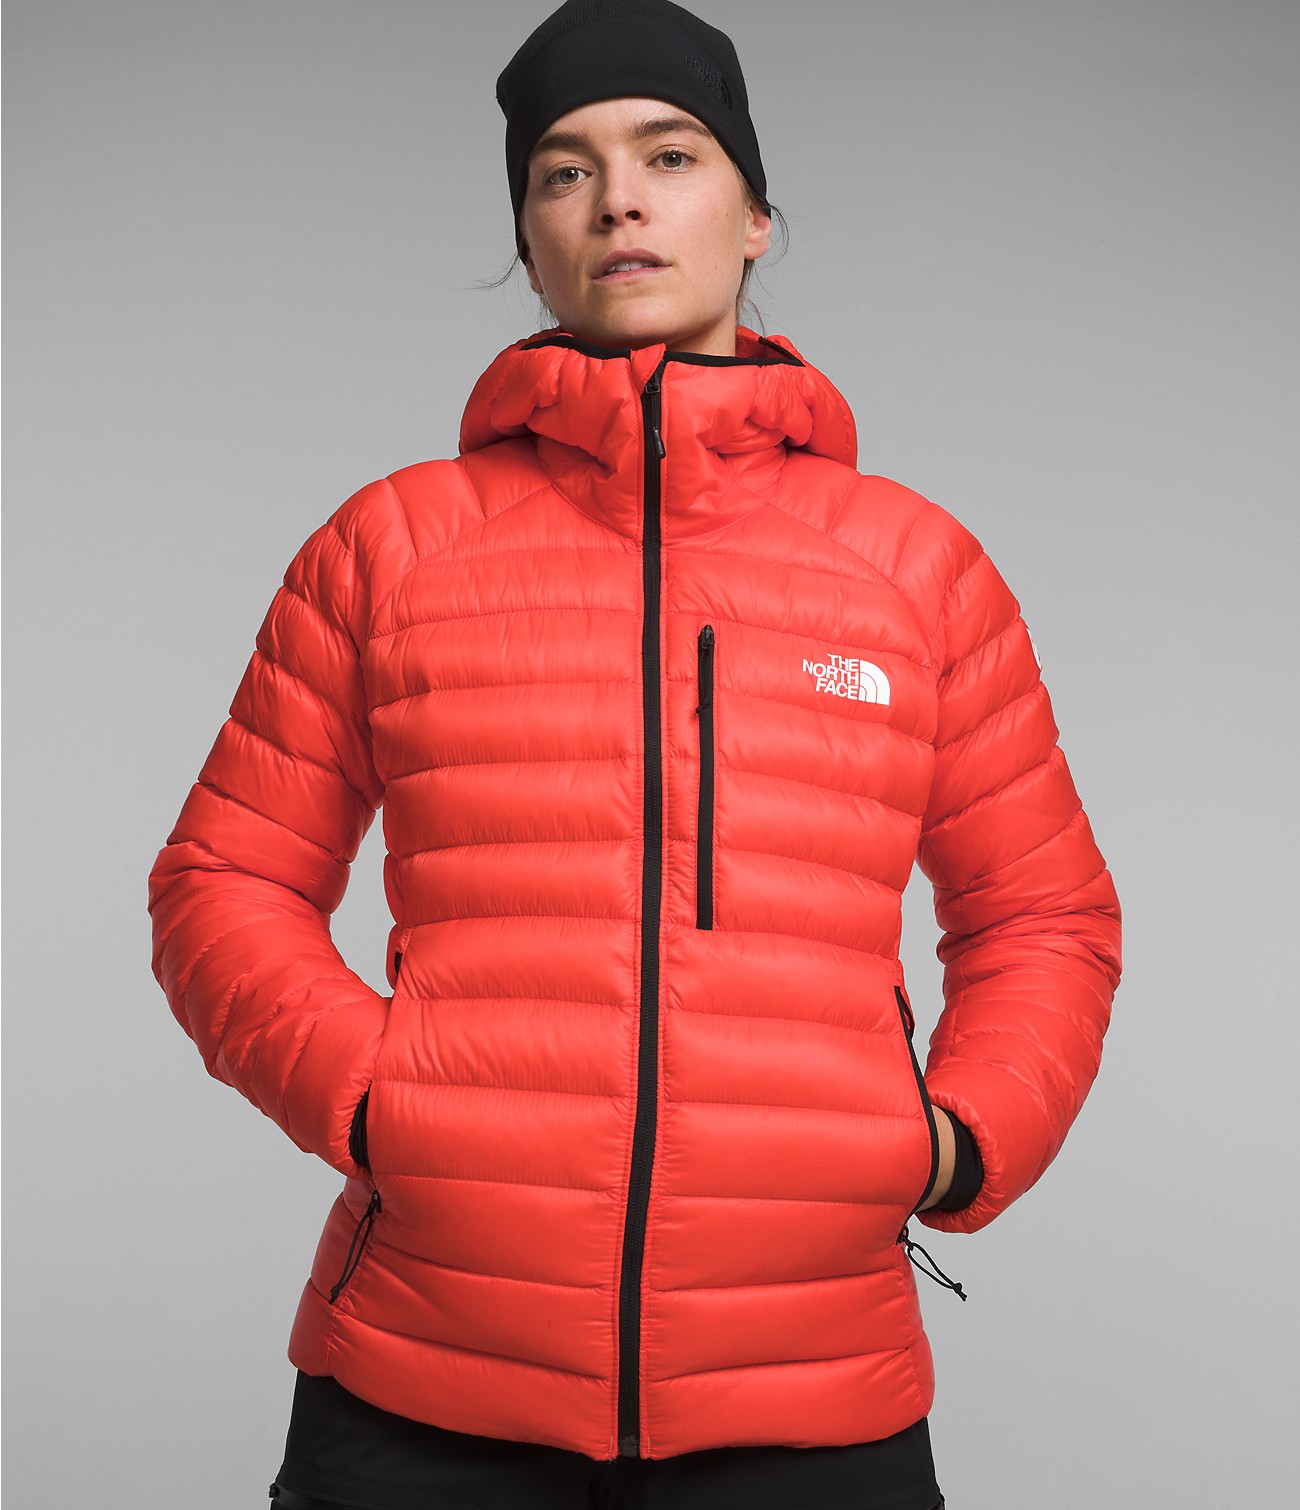 Unlock Wilderness' choice in the Montbell Vs North Face comparison, the Summit Series Breithorn Hoodie by The North Face